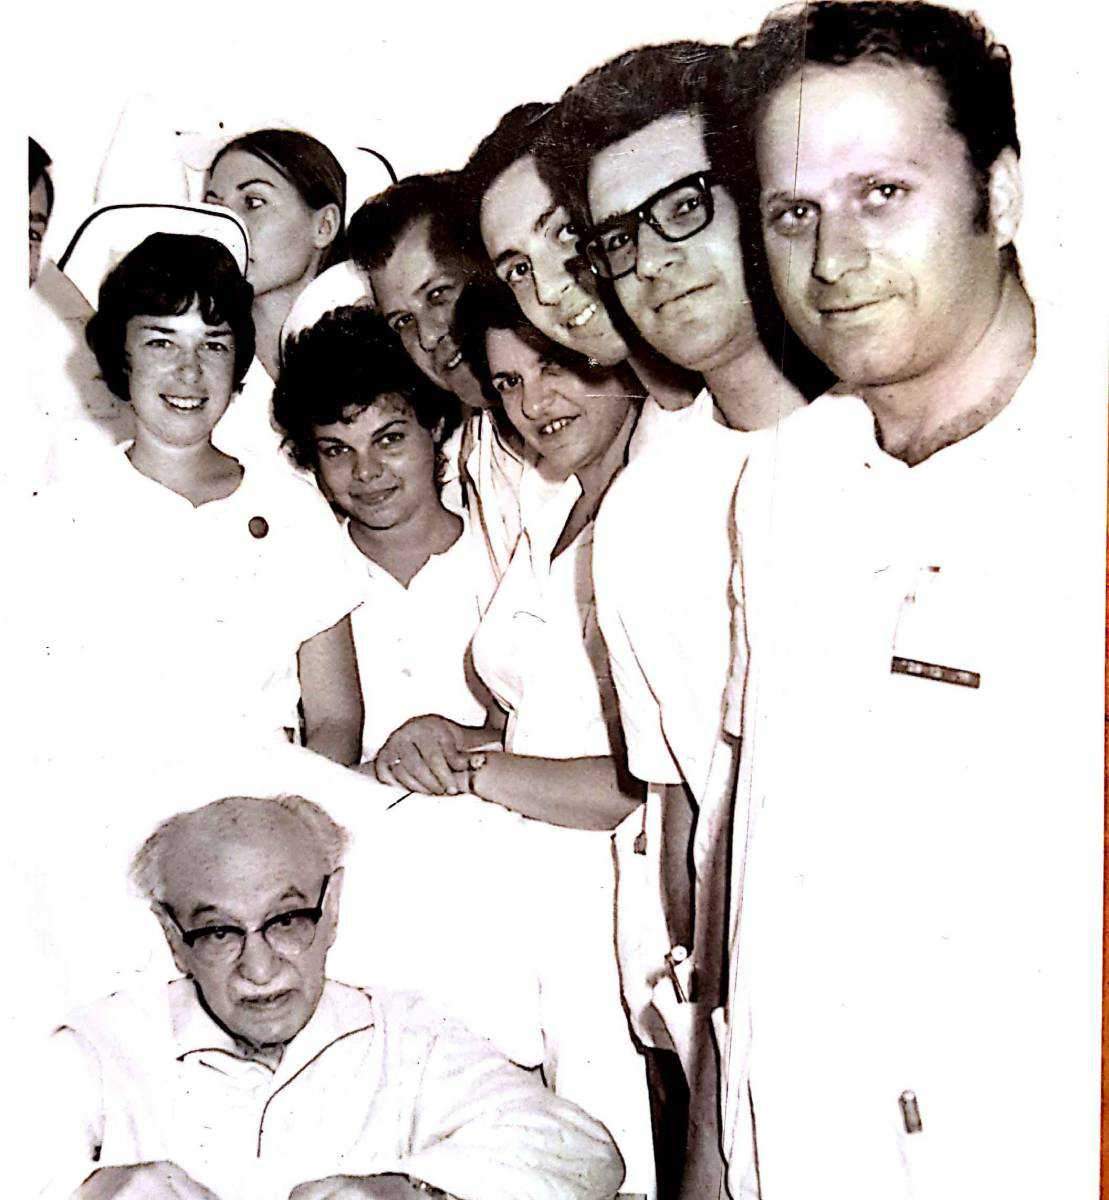 Beilinson Hospital, 1970. The patient, below, left, is Israels's third president Zalman Shazar. Pitlik, third from right, admitted Shazar to the ward